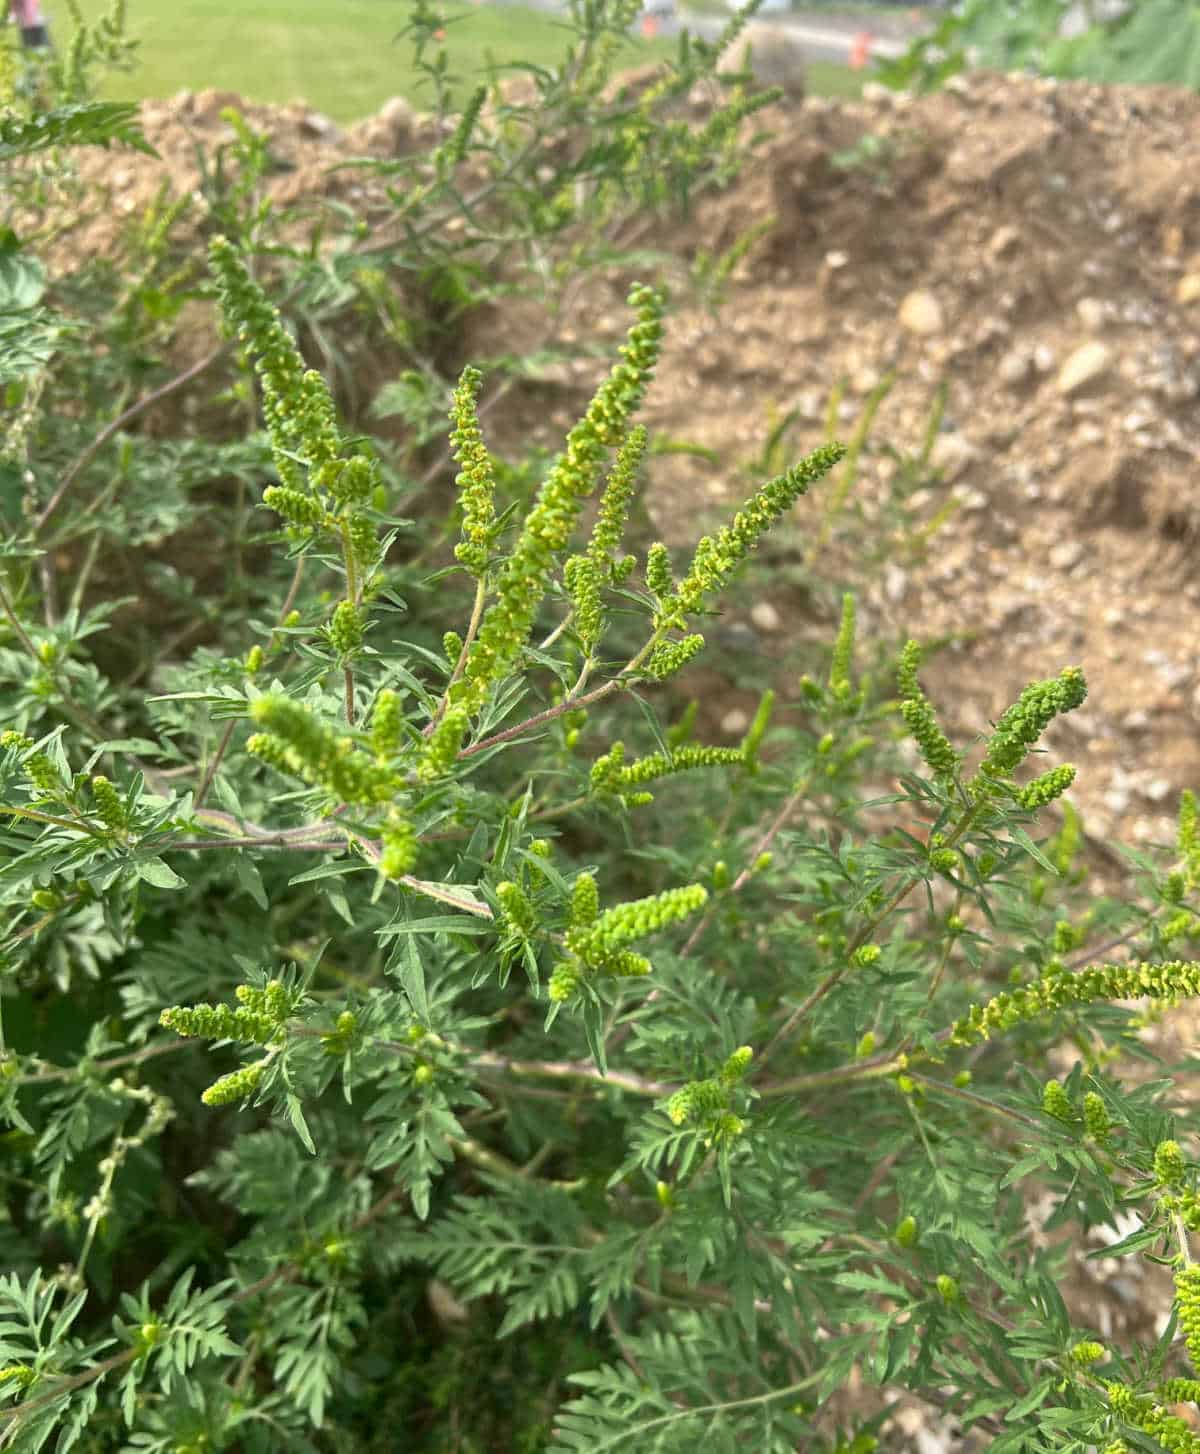 ragweed growing in a construction dirt mound